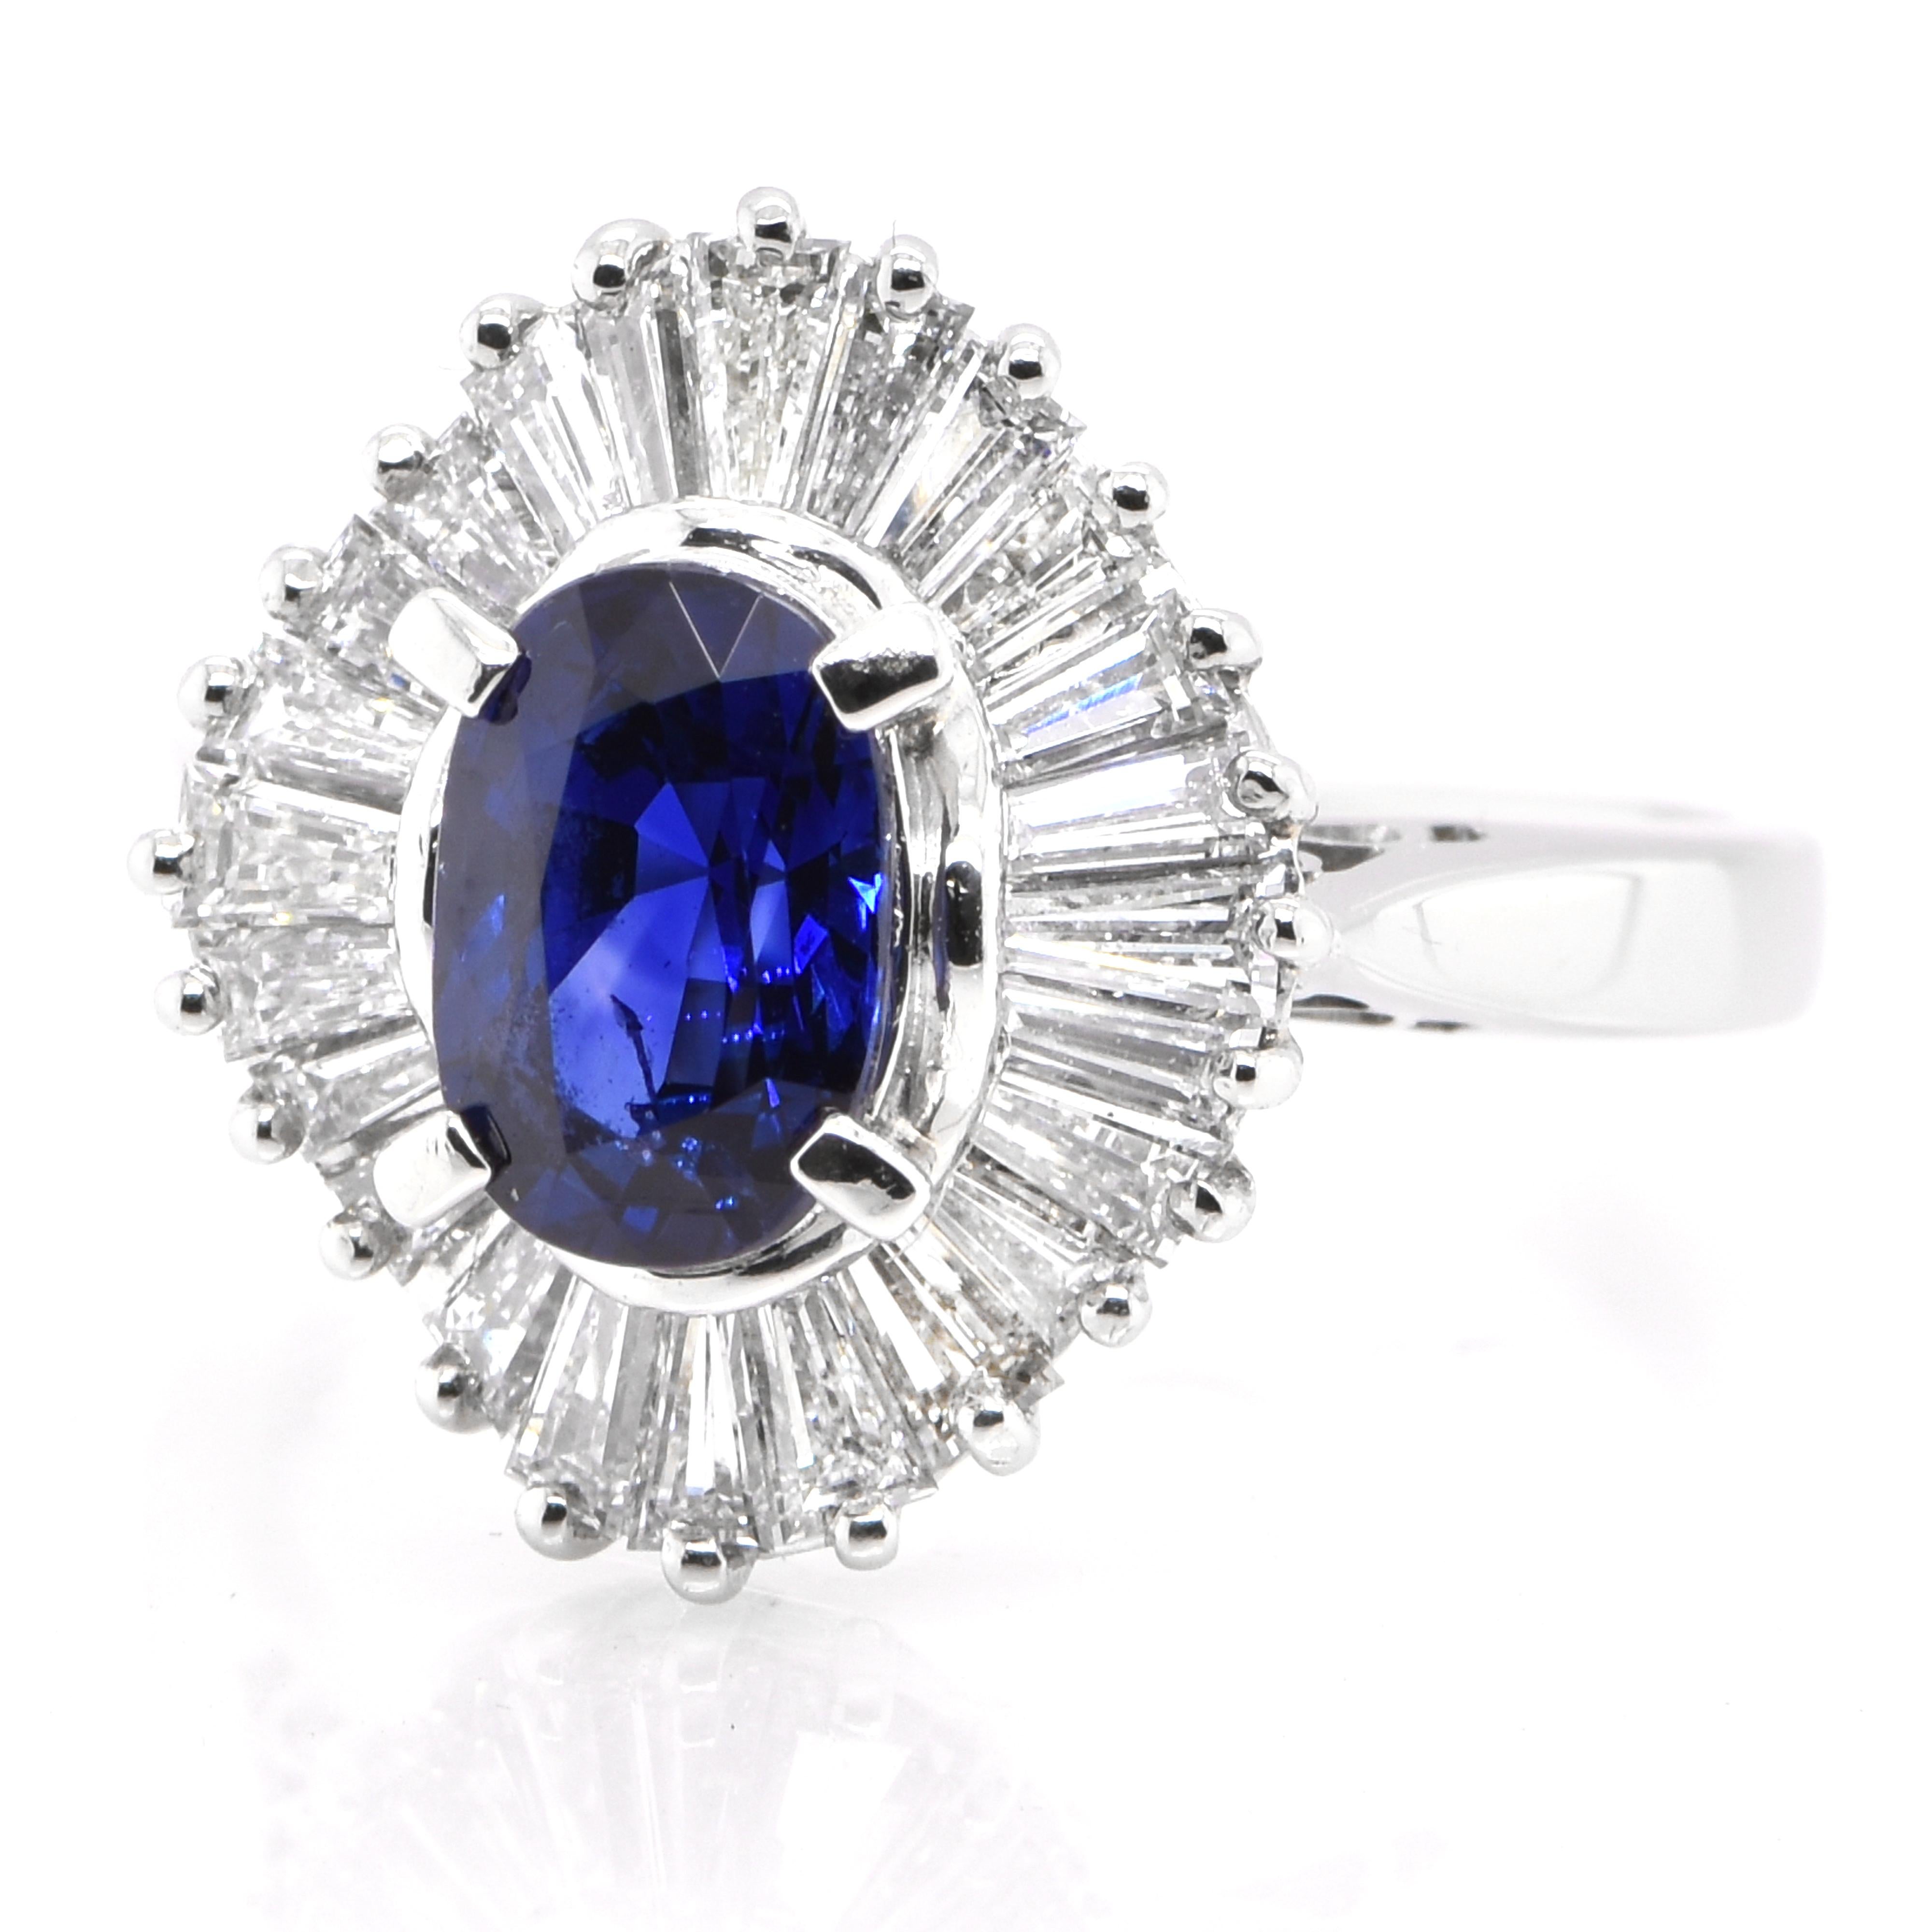 A beautiful ring featuring 1.16 Carat Natural Blue Sapphire and 0.83 Carats Diamond Accents set in Platinum. Sapphires have extraordinary durability - they excel in hardness as well as toughness and durability making them very popular in jewelry.